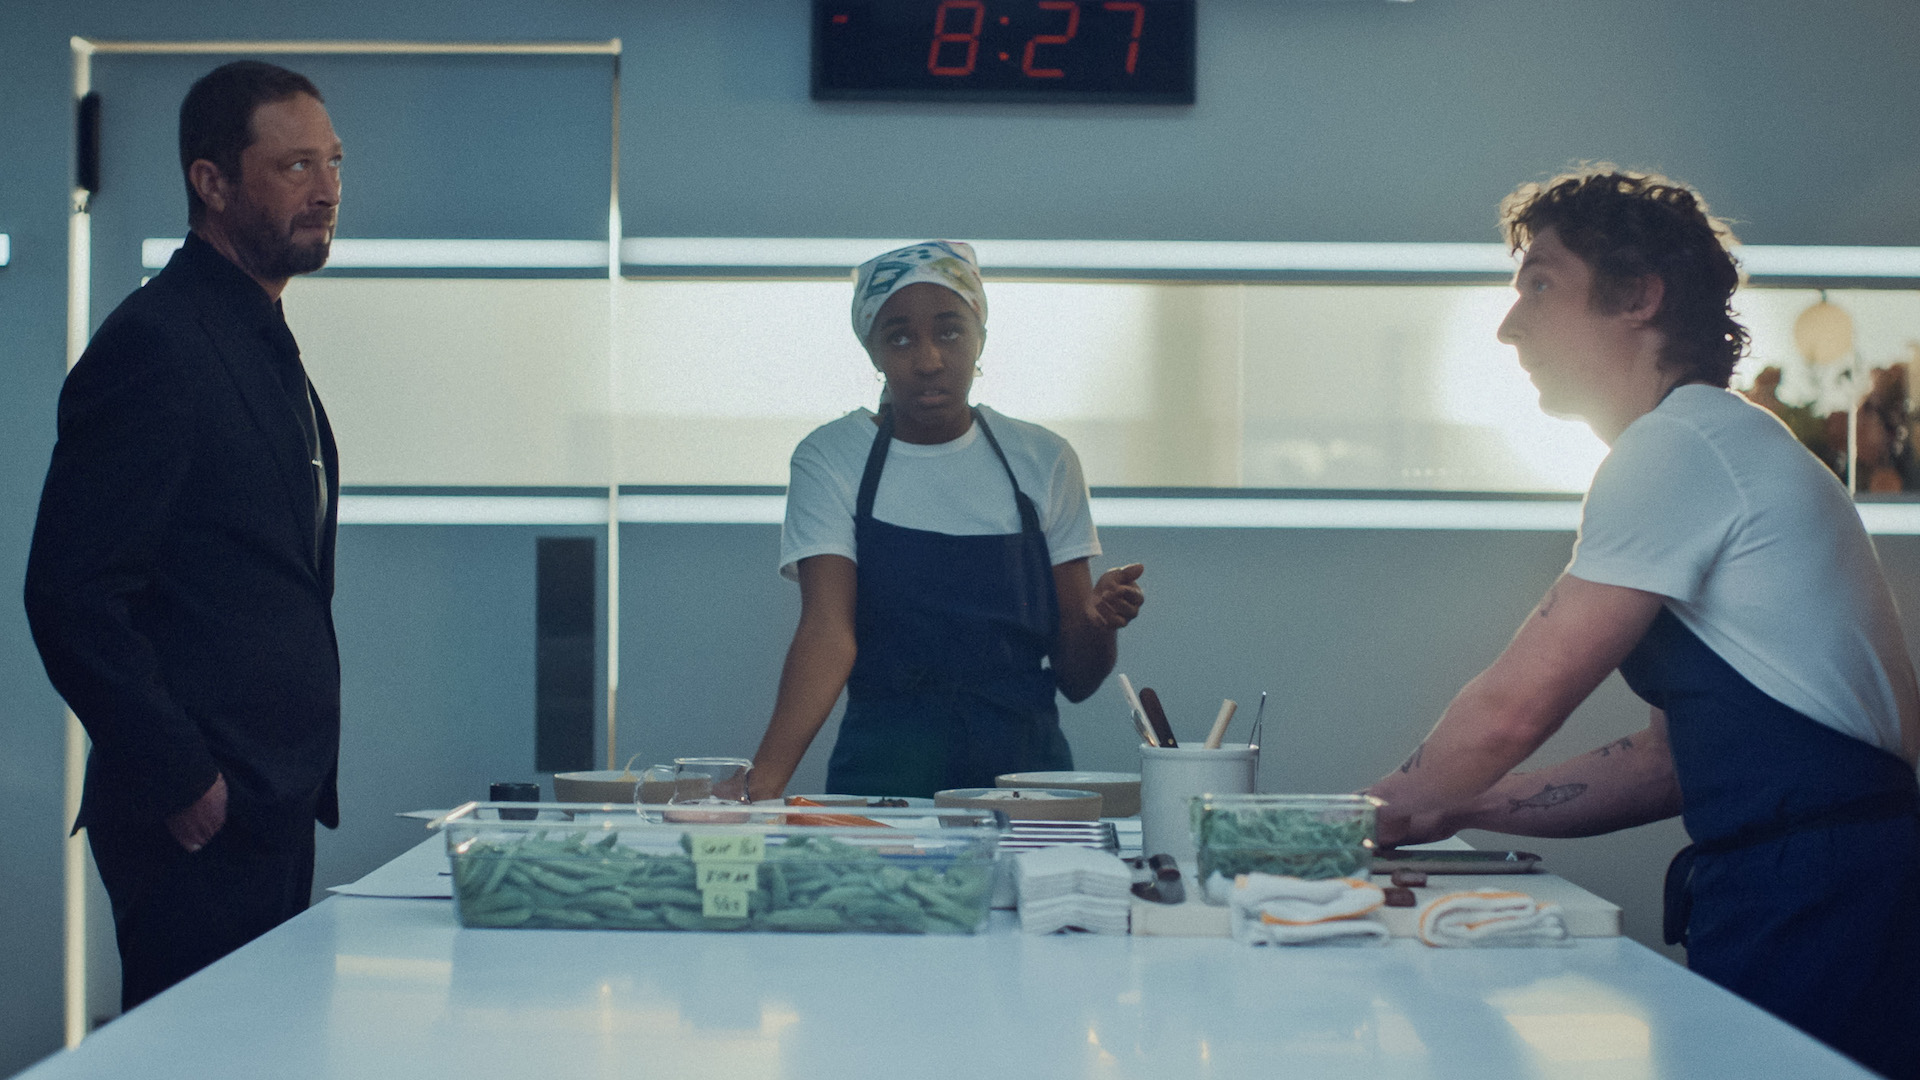 Two chefs and a host gathered around a white counter with food prep; still from 'The Bear'